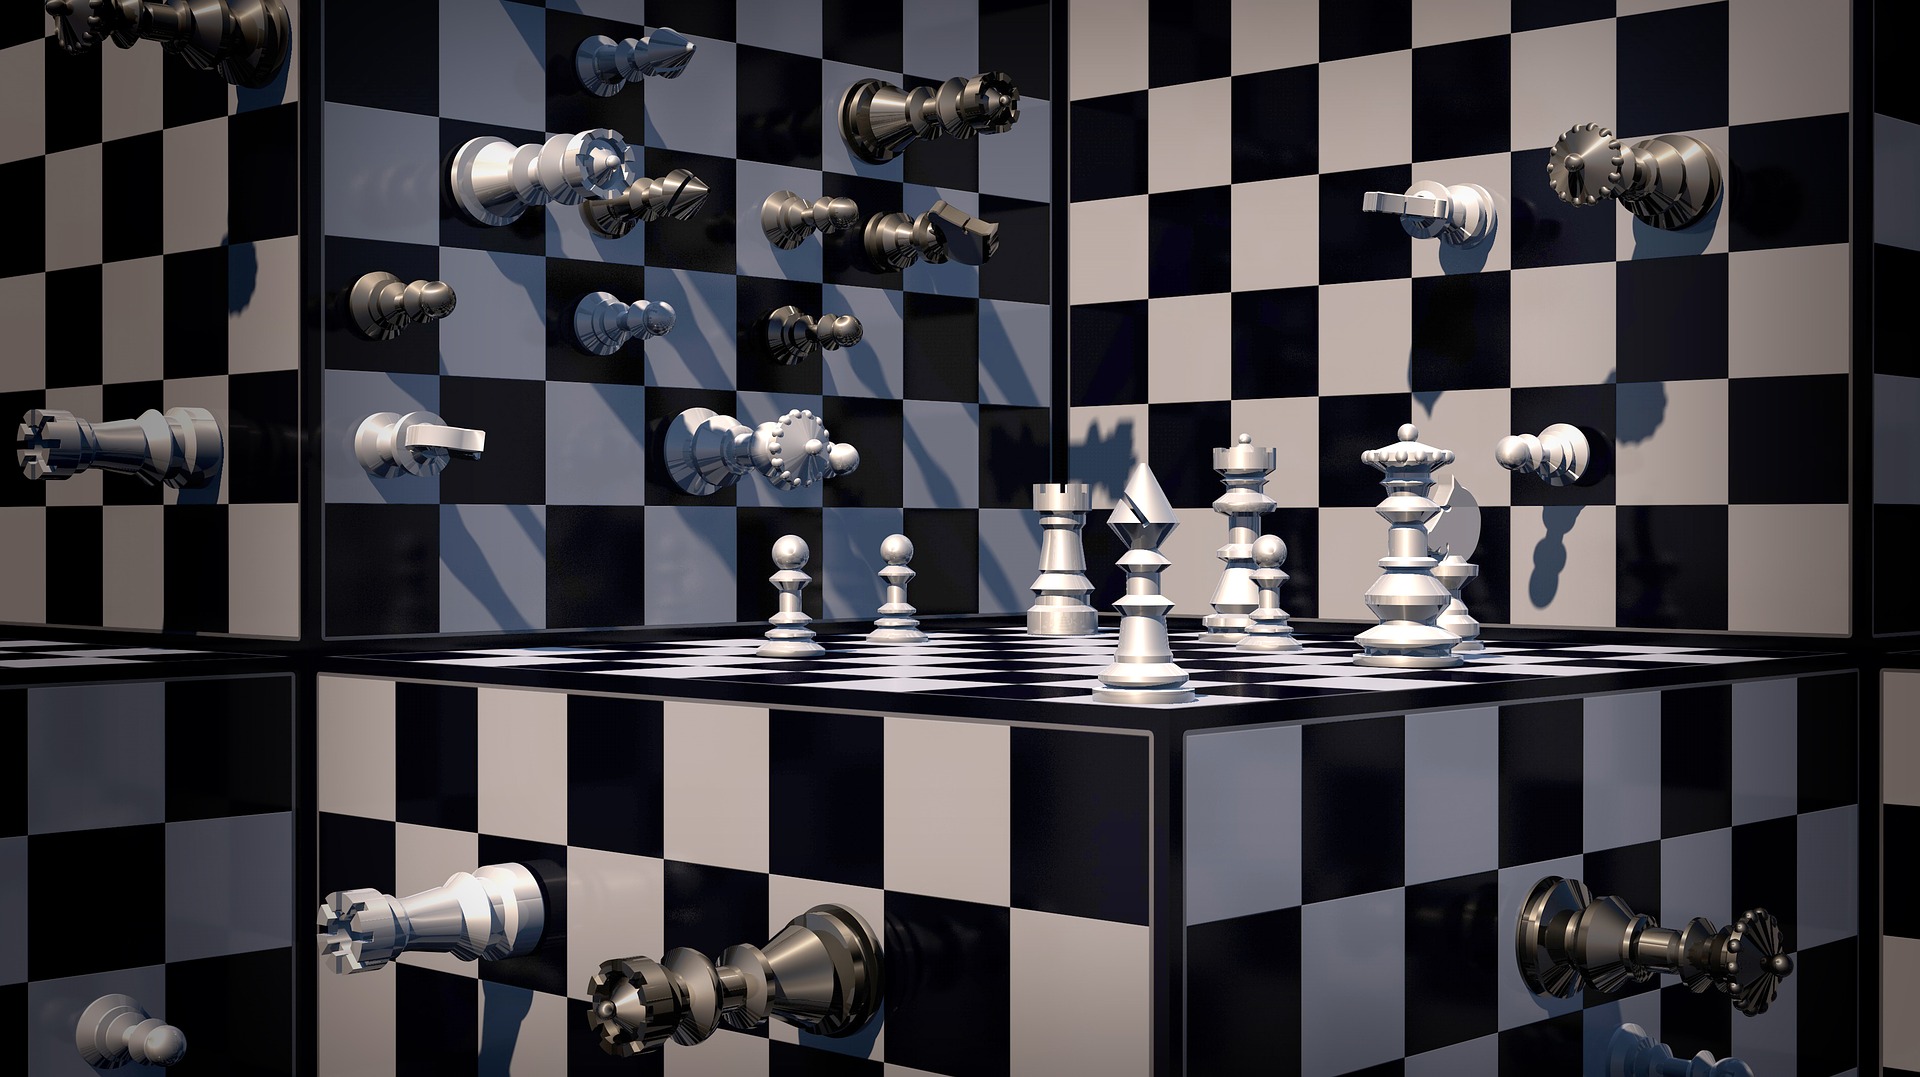 Three dimensional chess - Strategy